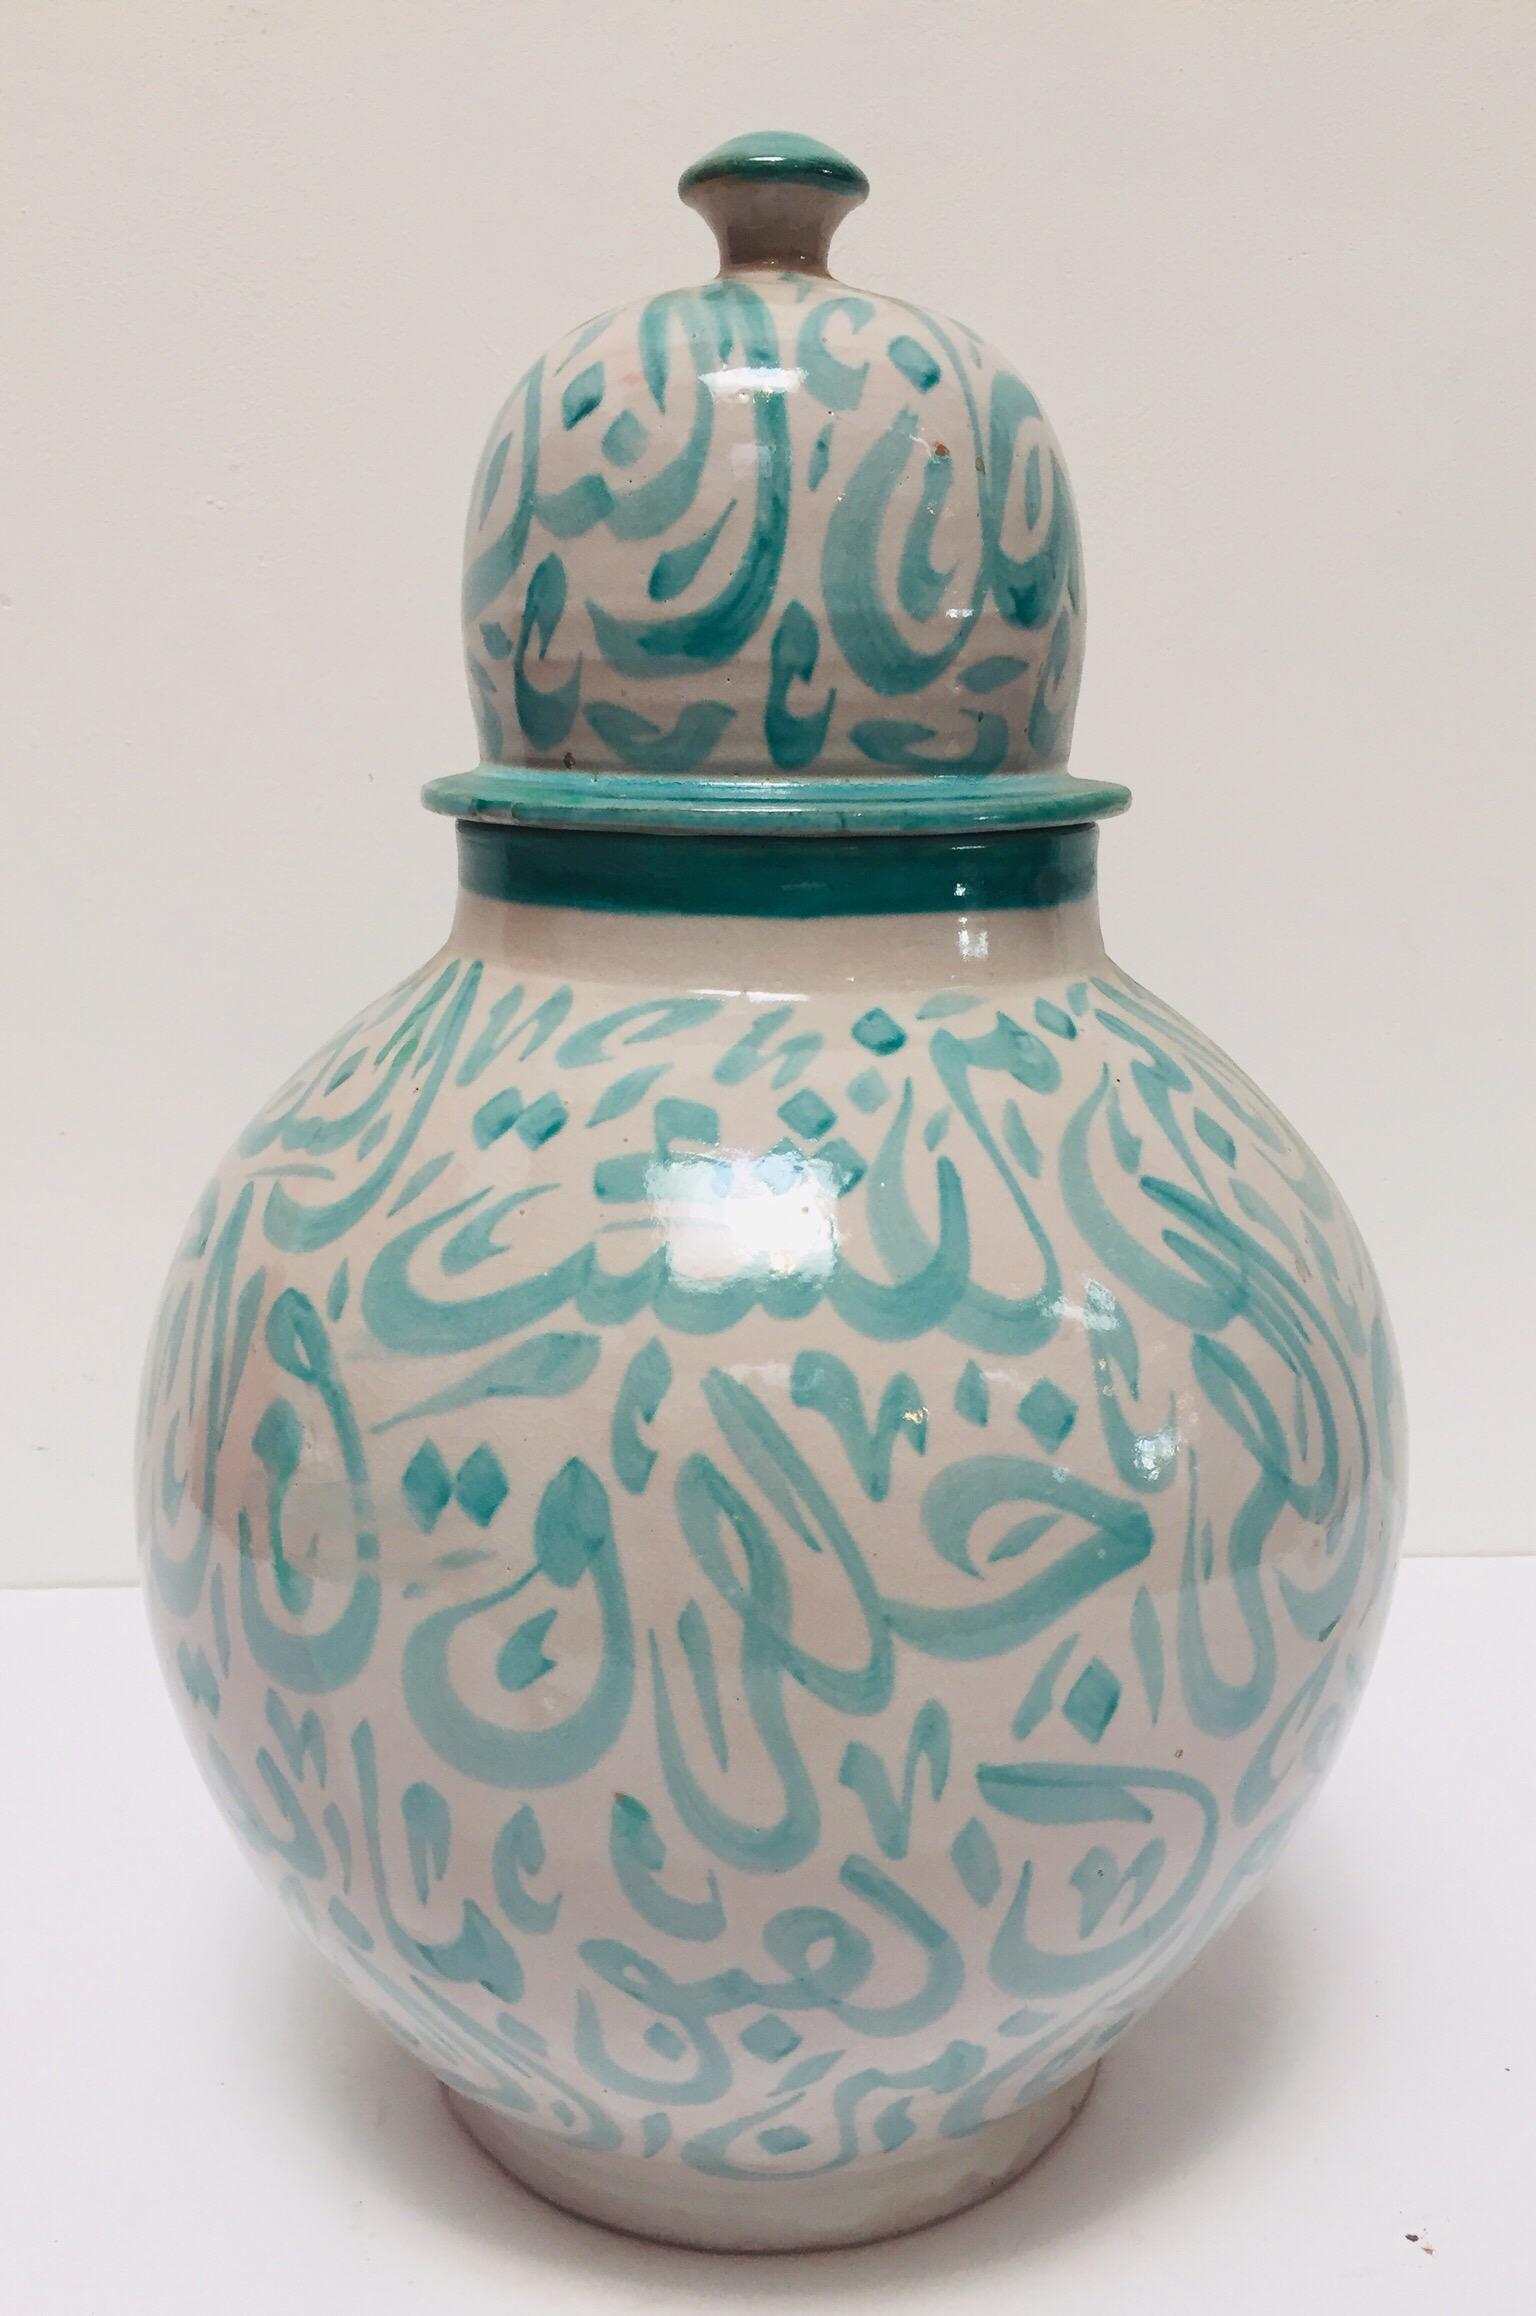 Hand-Crafted Moroccan Ceramic Lidded Urn from Fez with Arabic Calligraphy Lettrism Writing